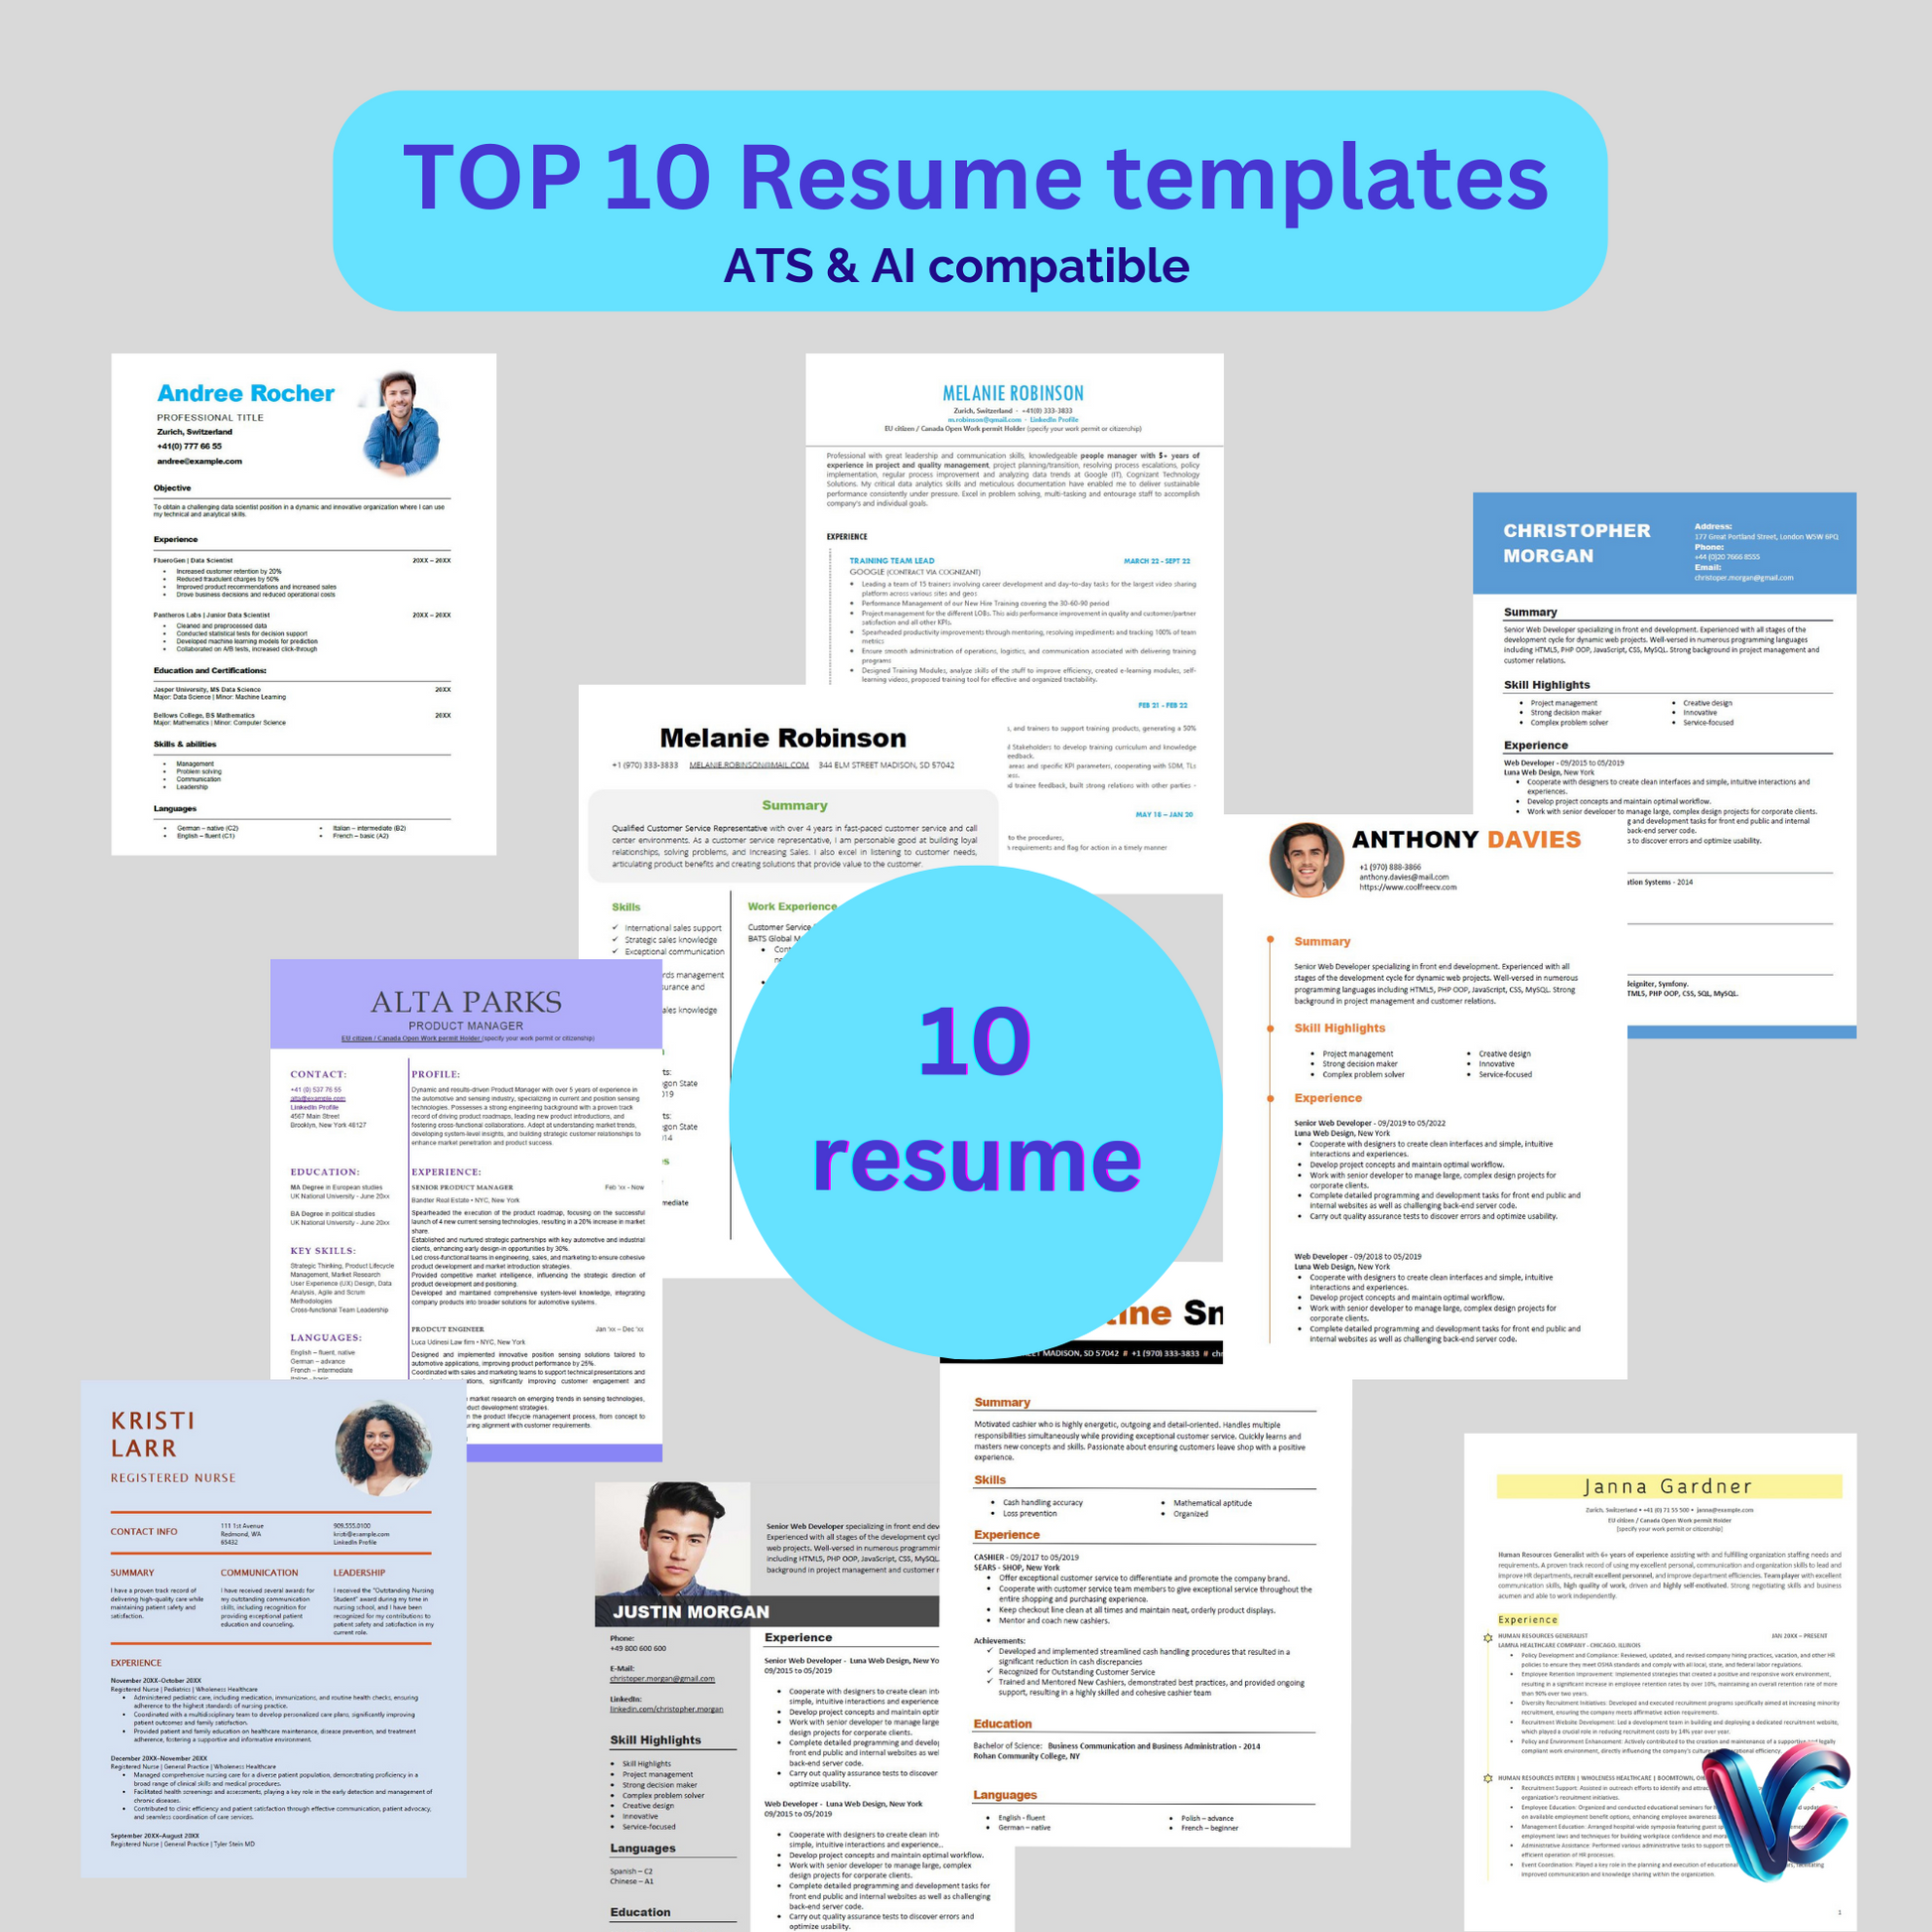 Top 10 ATS compatible Resume Templates, front page of digital product